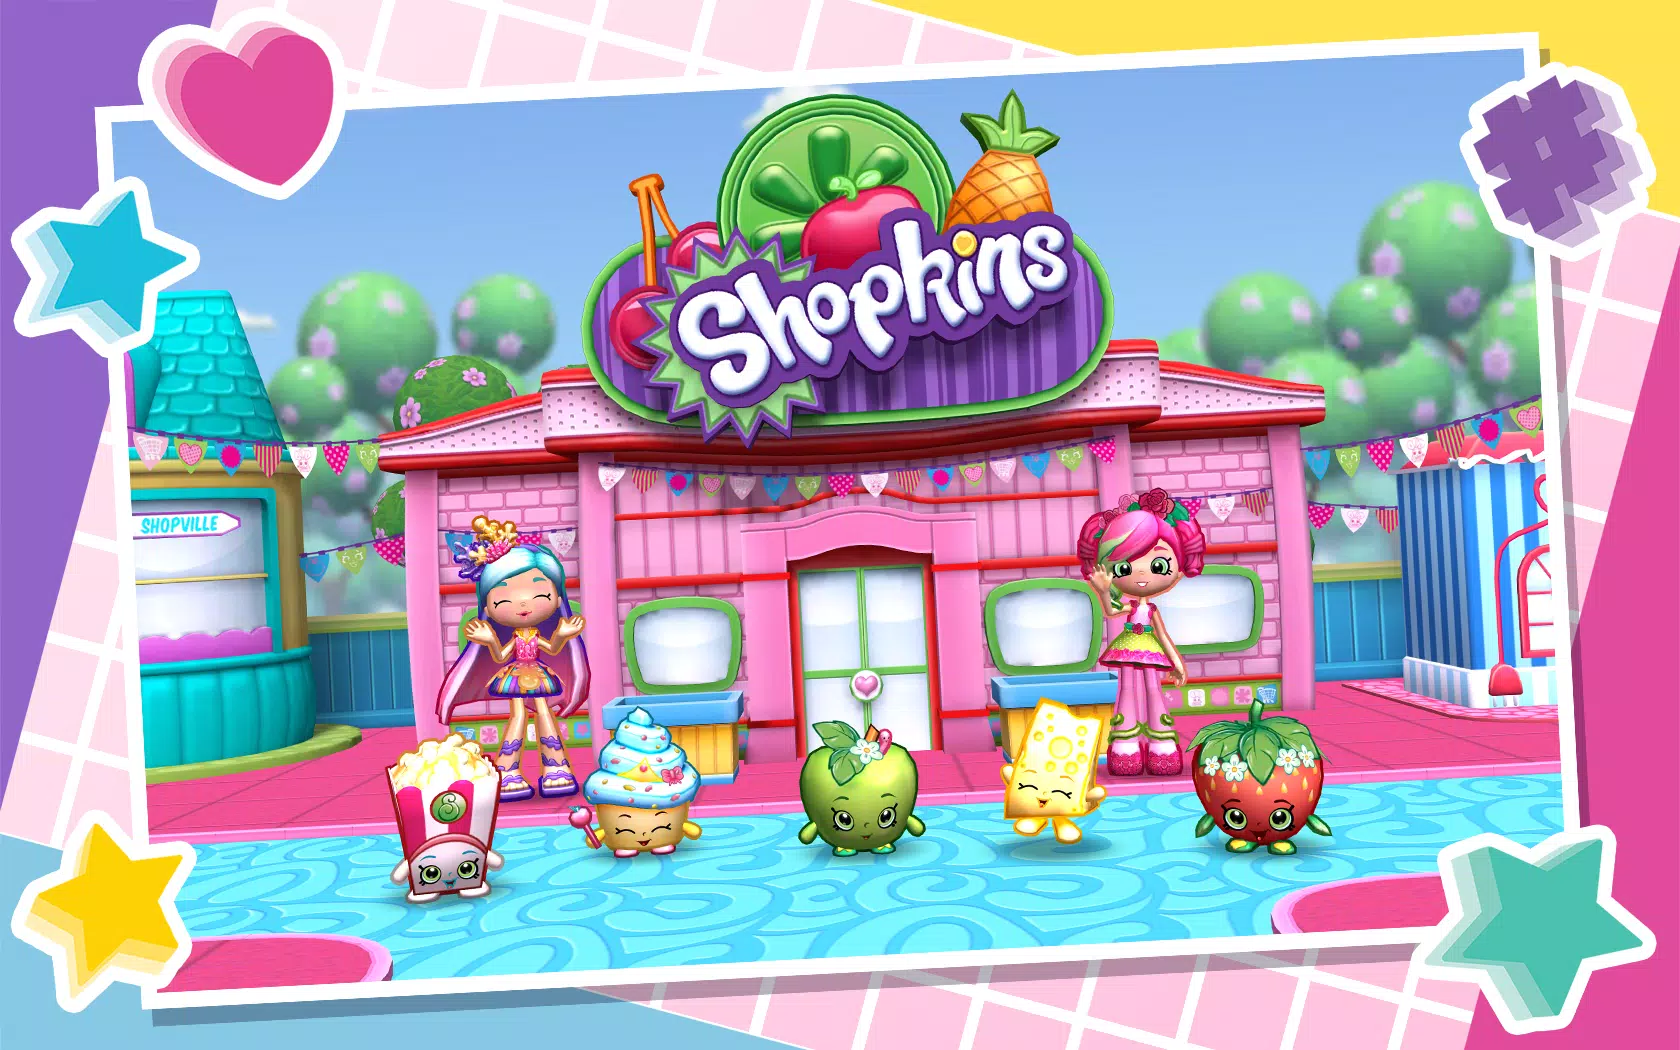 Shopkins for Android - APK Download